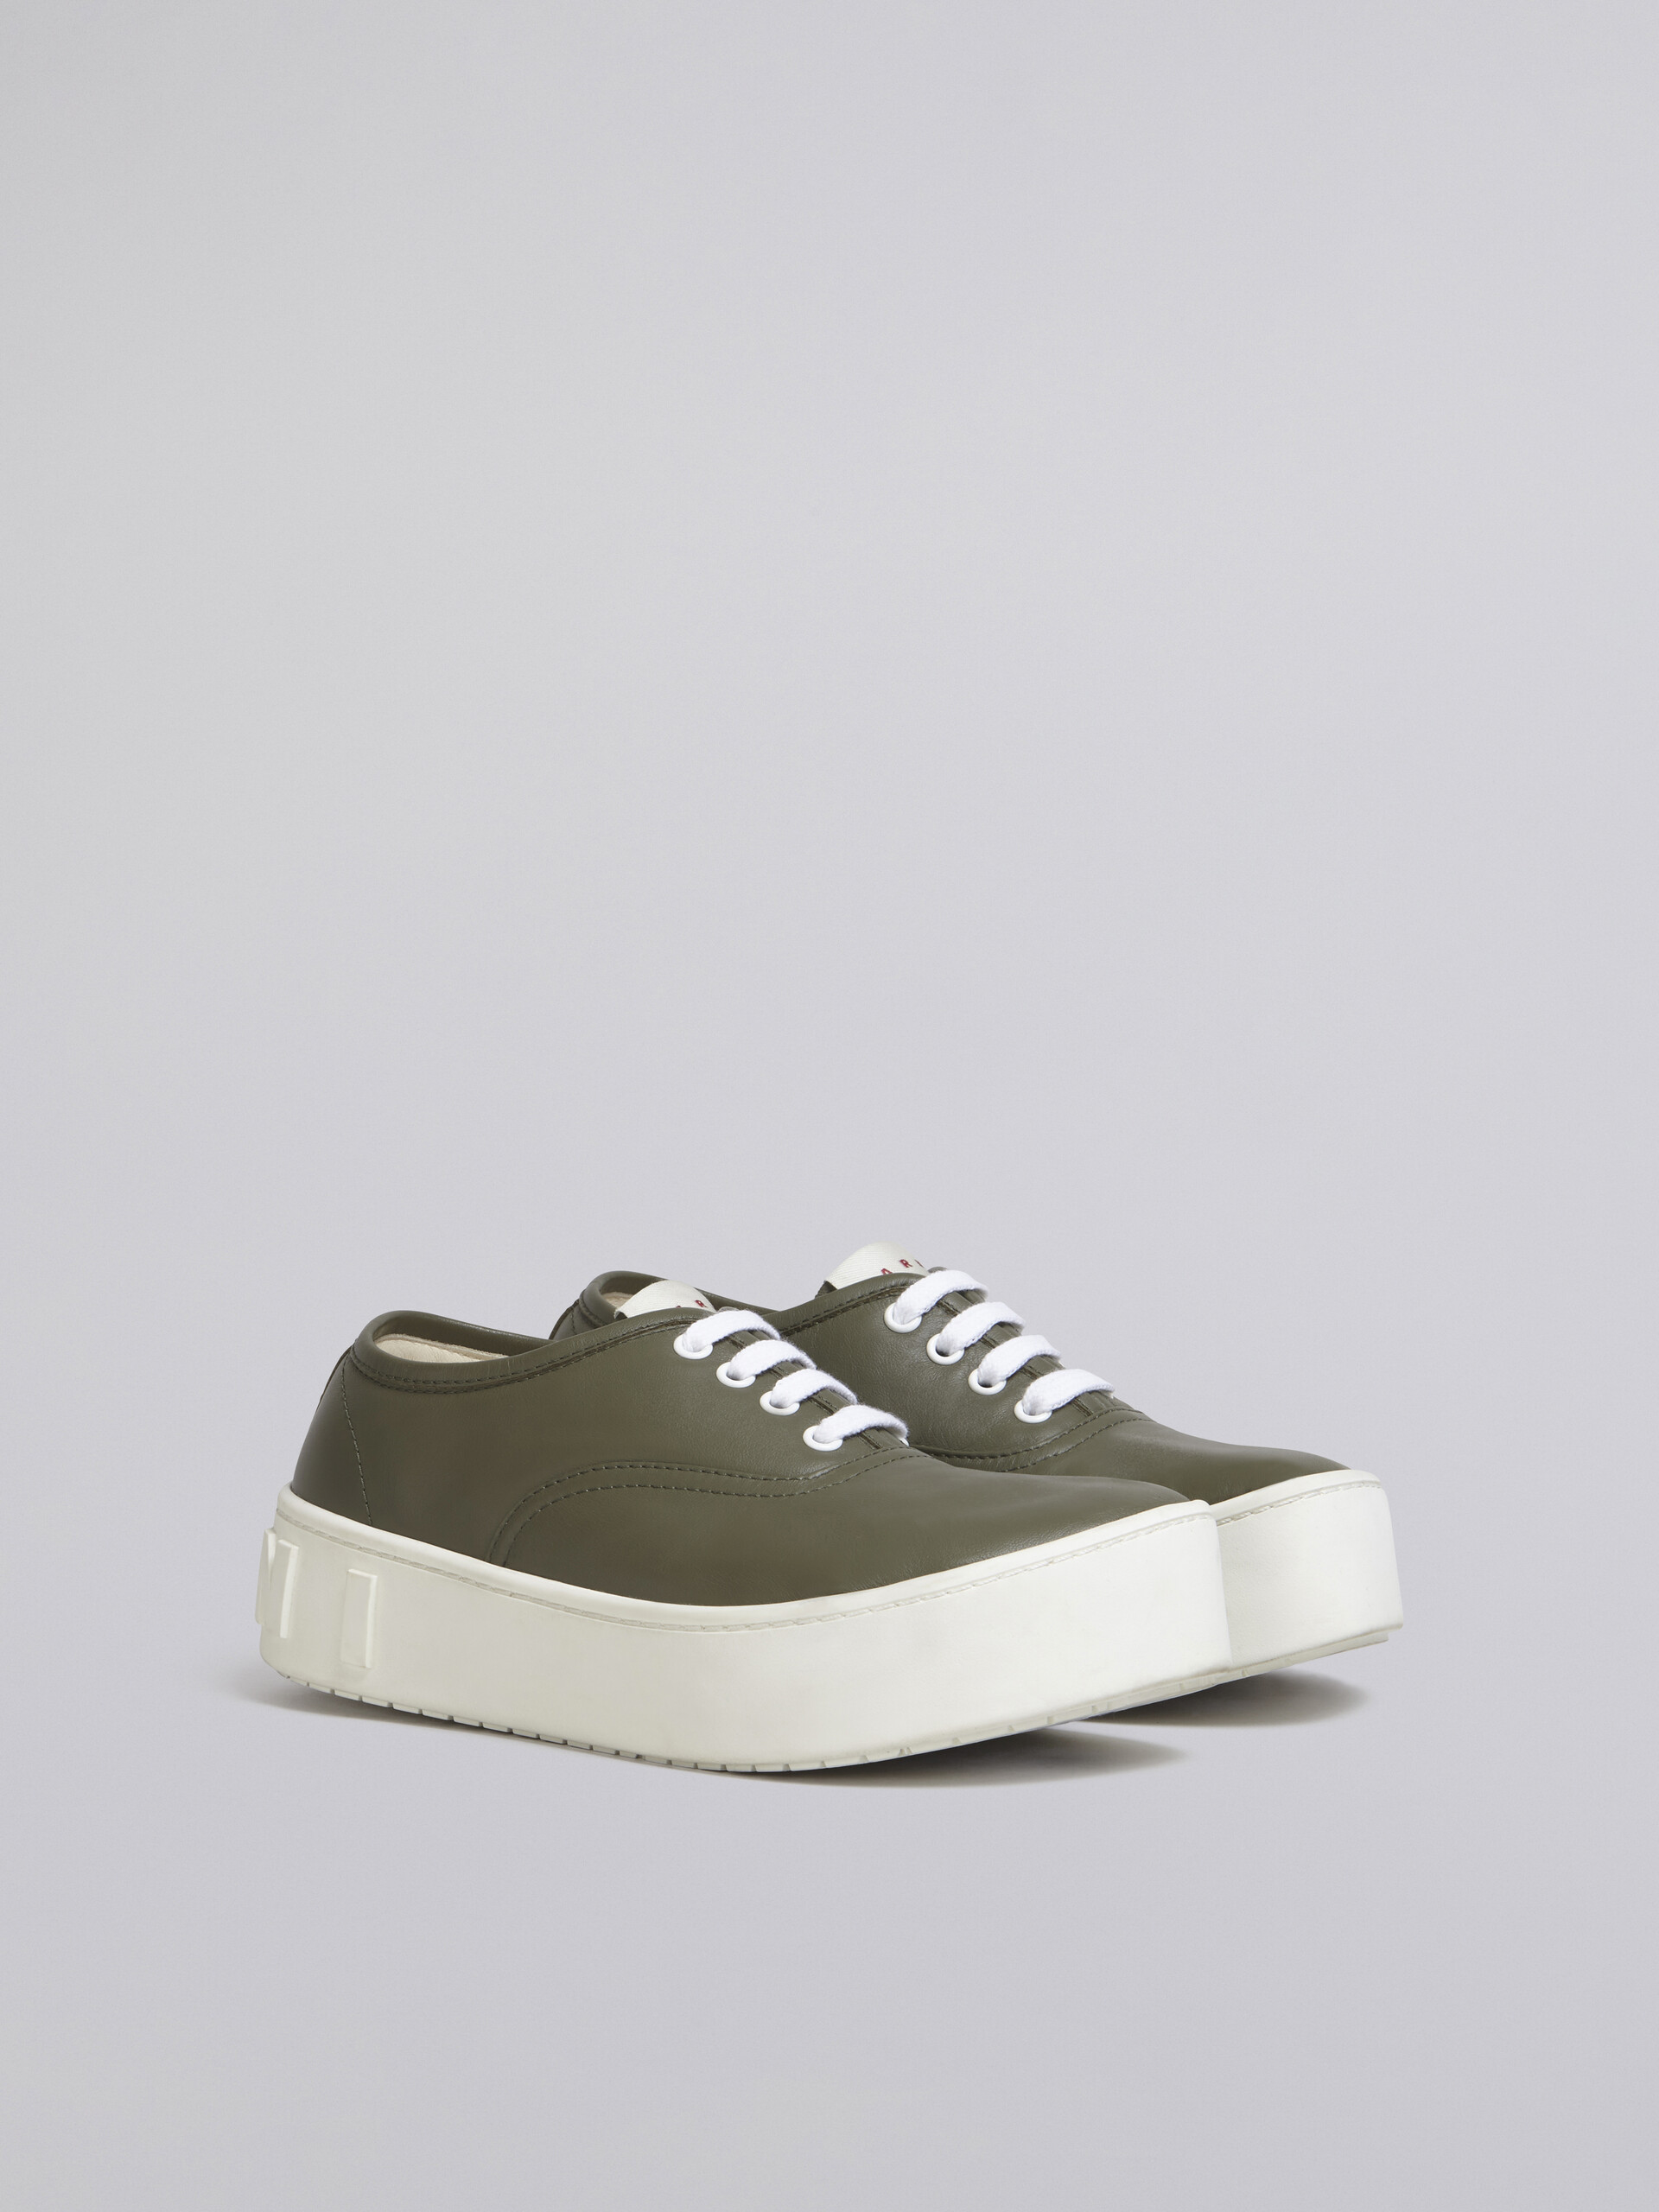 Green smooth calfskin sneaker with raised maxi Marni logo - Sneakers - Image 2